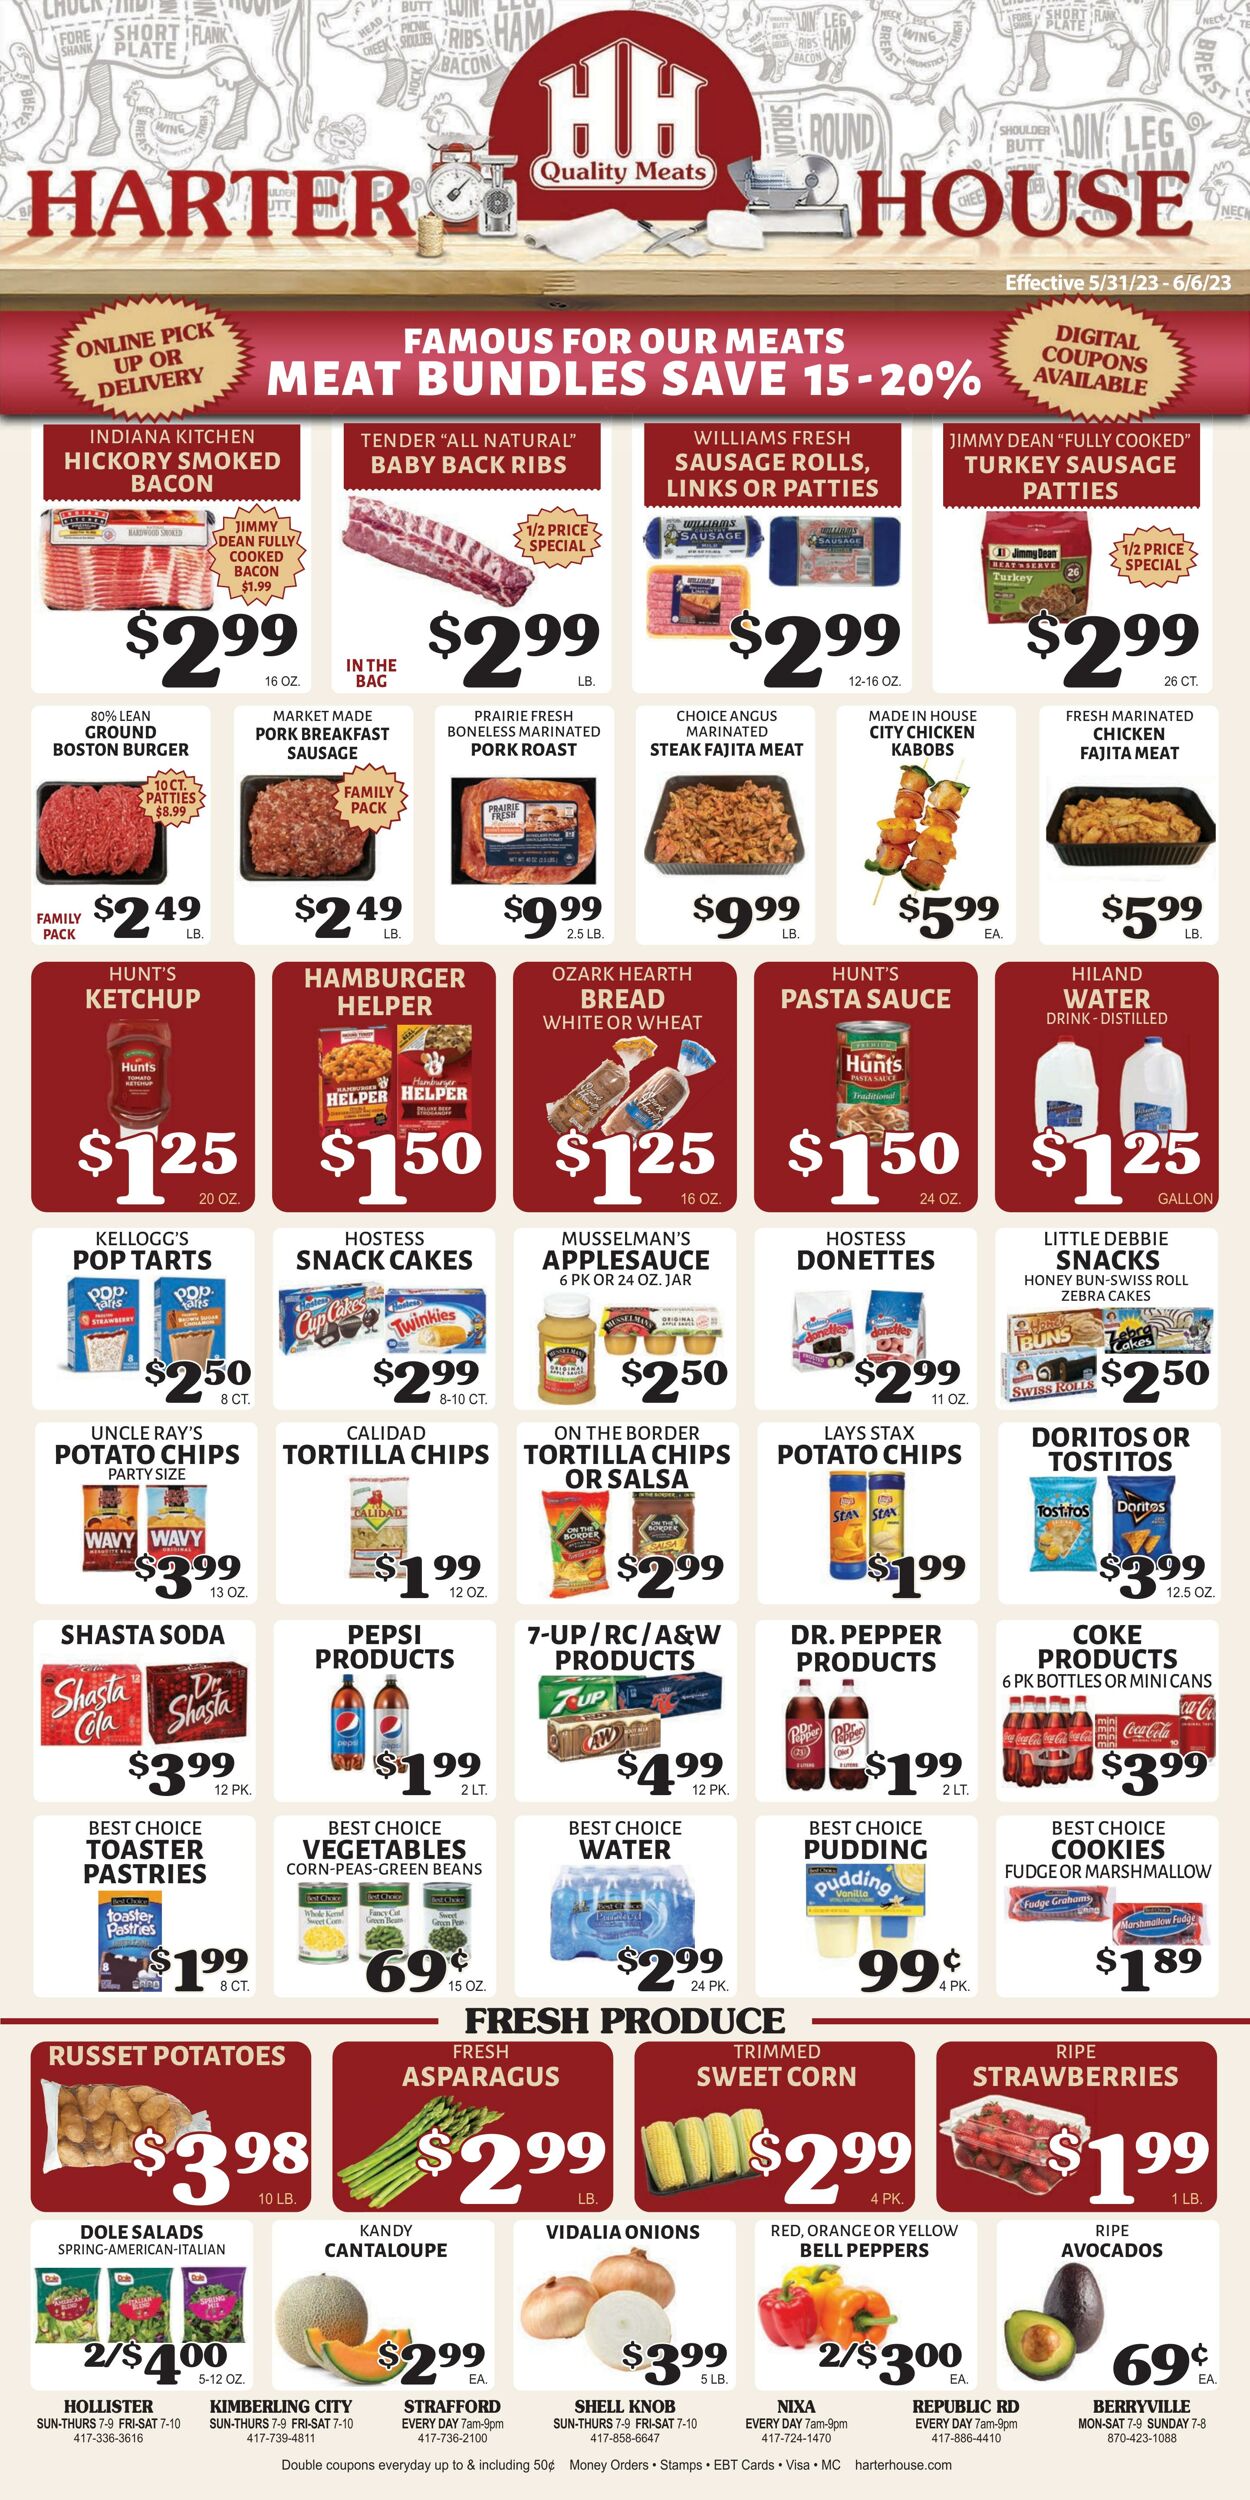 Harter House Promotional weekly ads